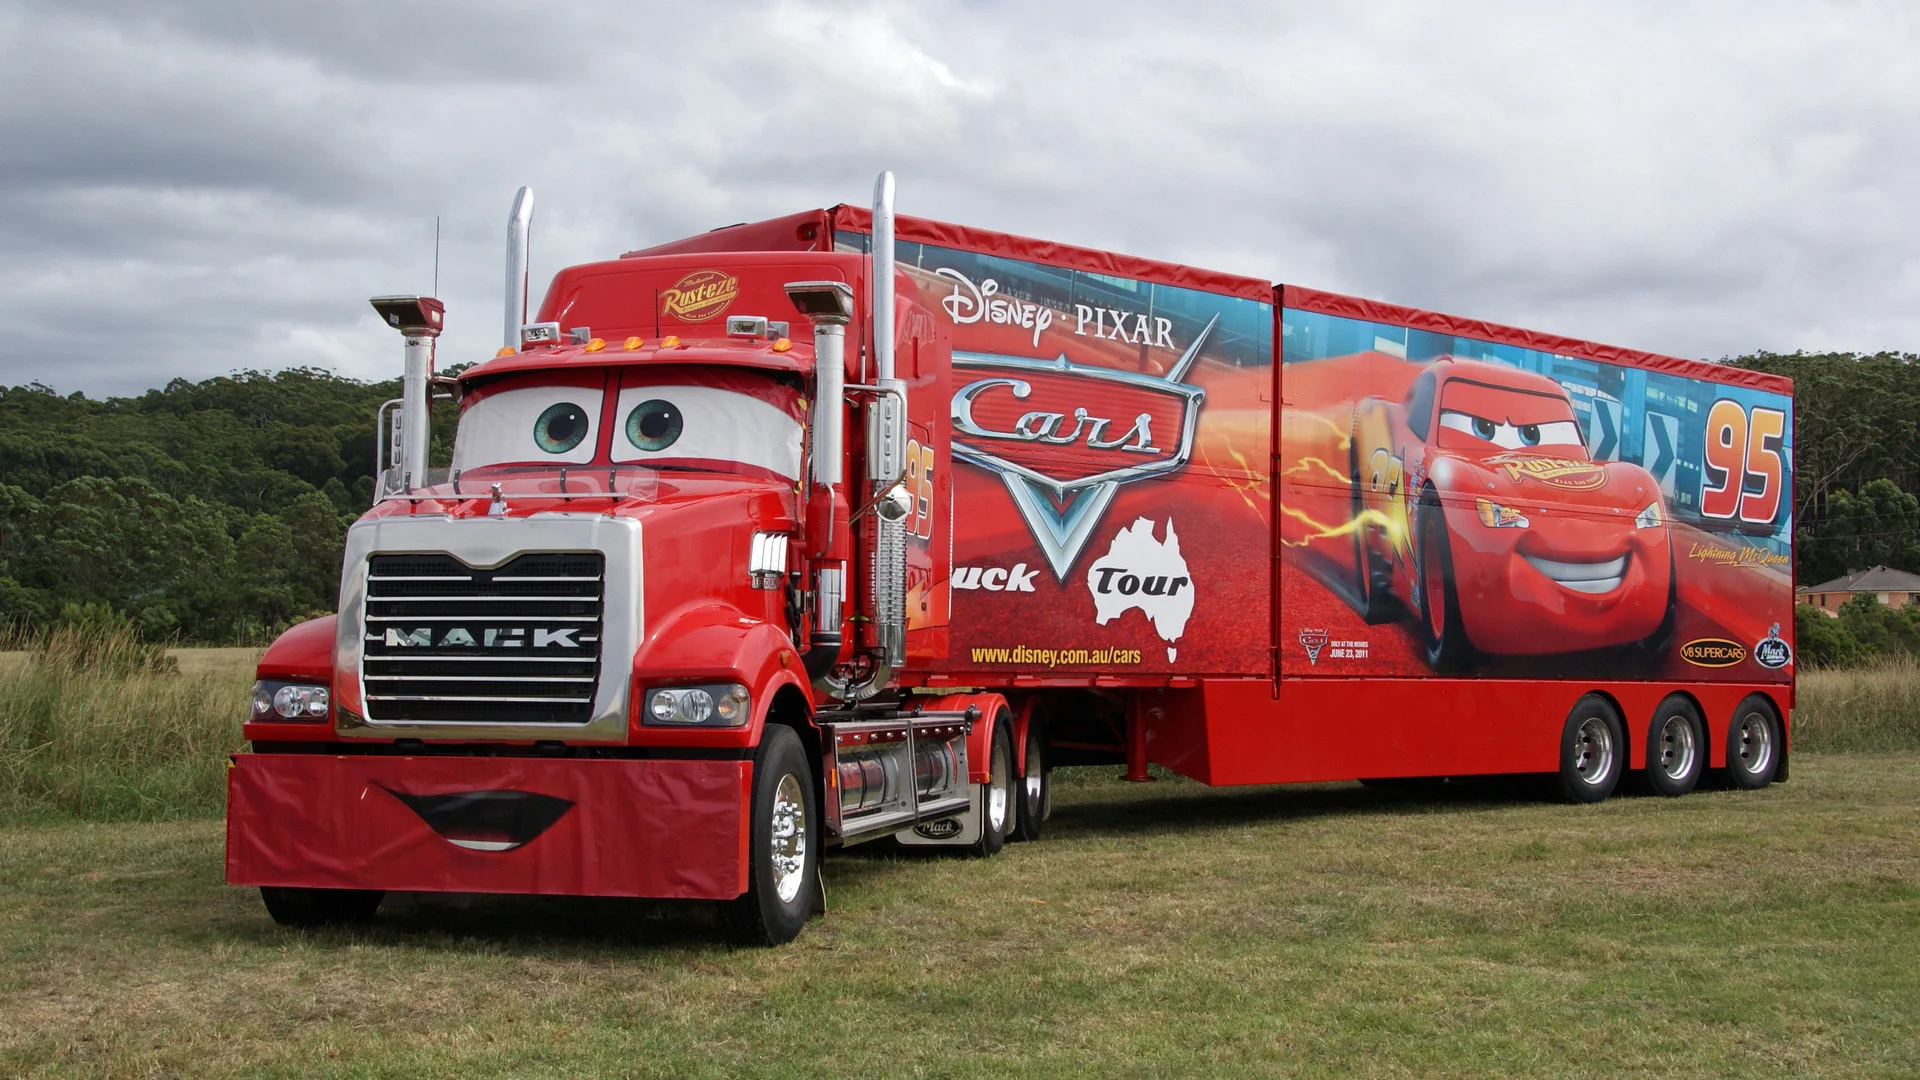 Mack semi truck – with the movie Cars